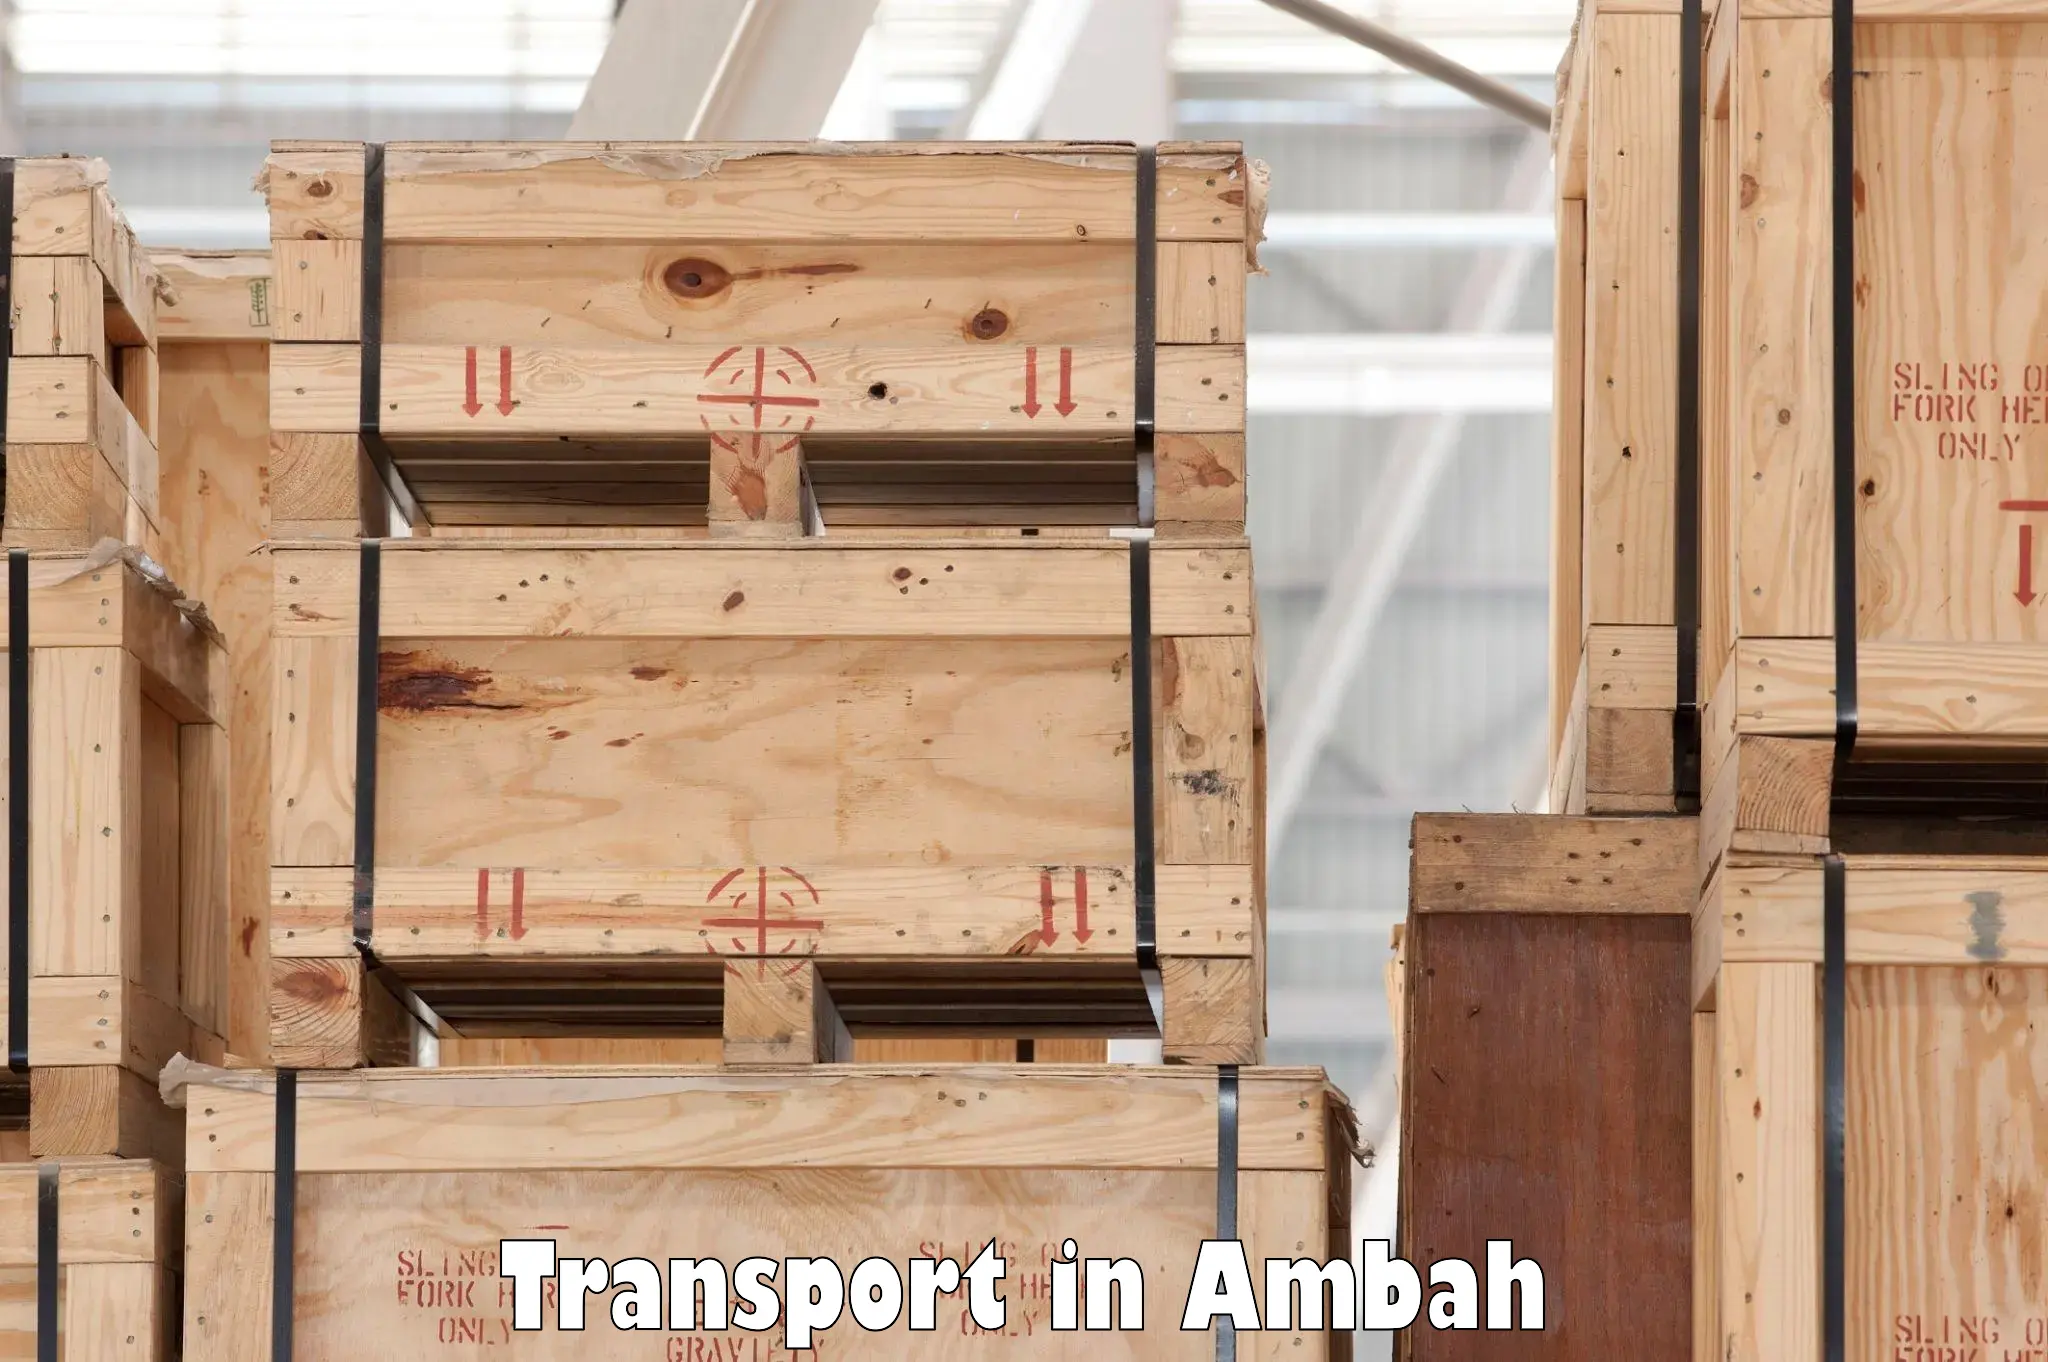 Daily transport service in Ambah